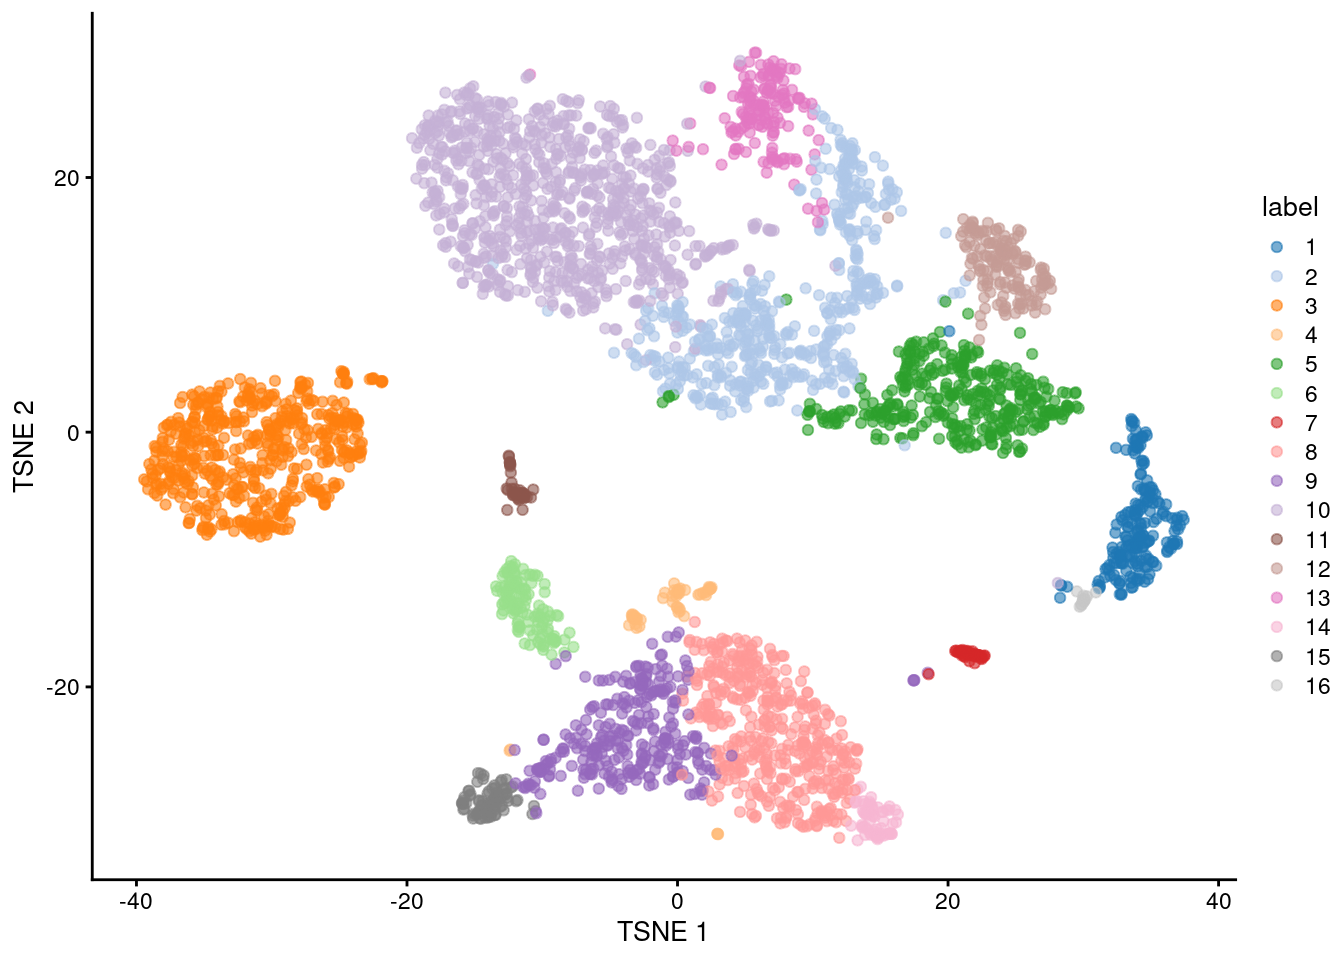 Obligatory $t$-SNE plot of the PBMC dataset, where each point represents a cell and is colored according to the assigned cluster.